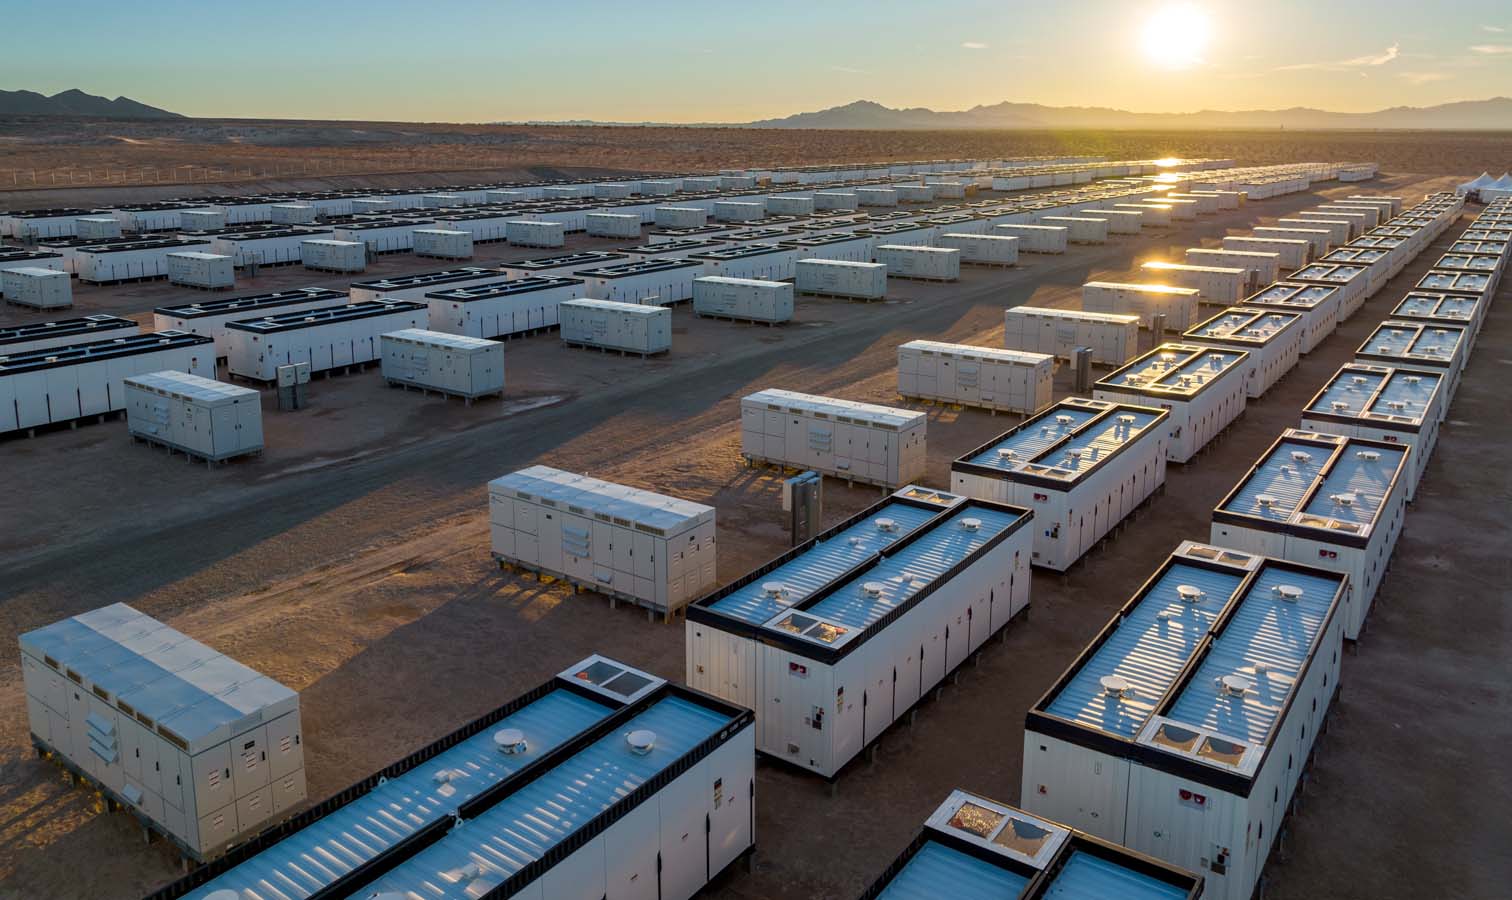 A photo of rows of energy storage containers in a desert landscape.